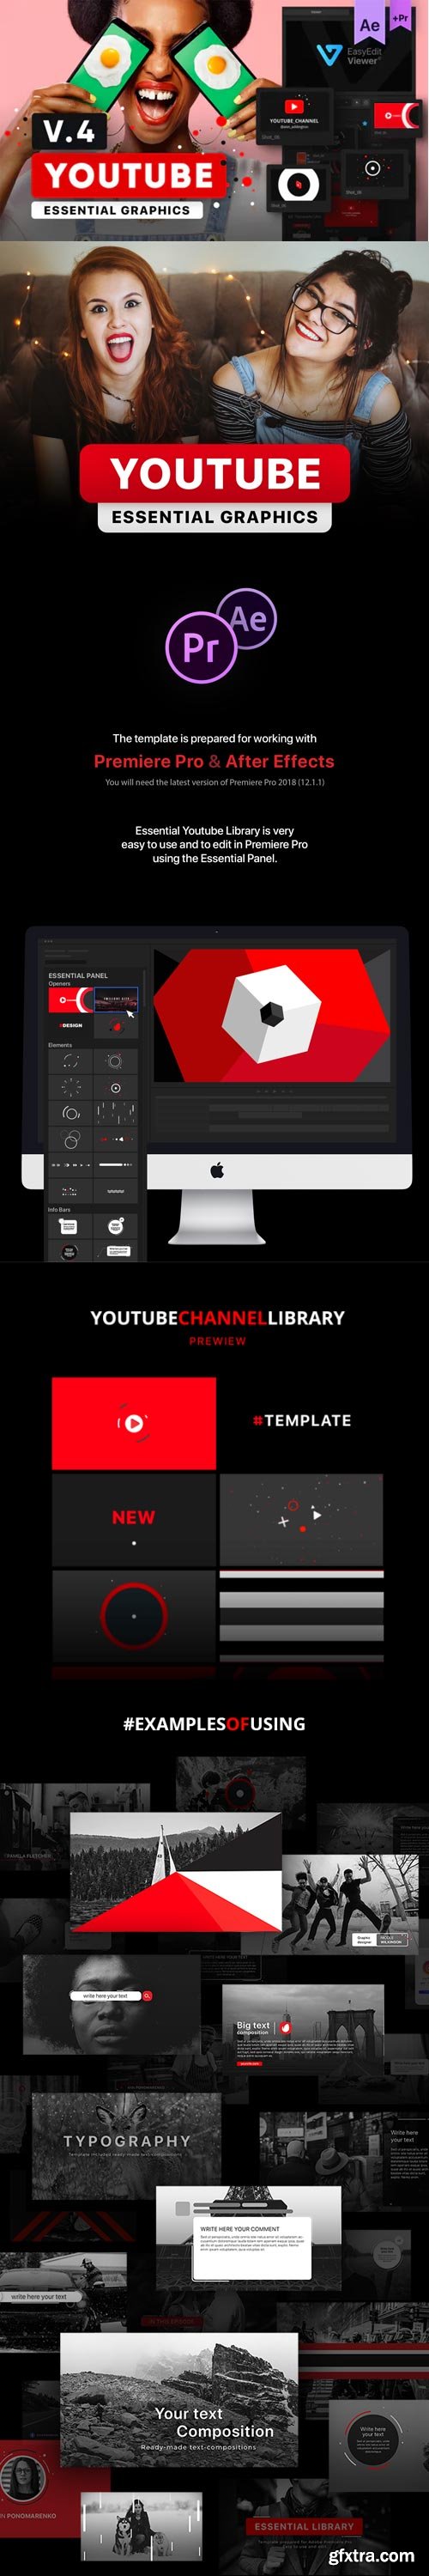 Videohive - Youtube Essential Library V4.1 - 21601793